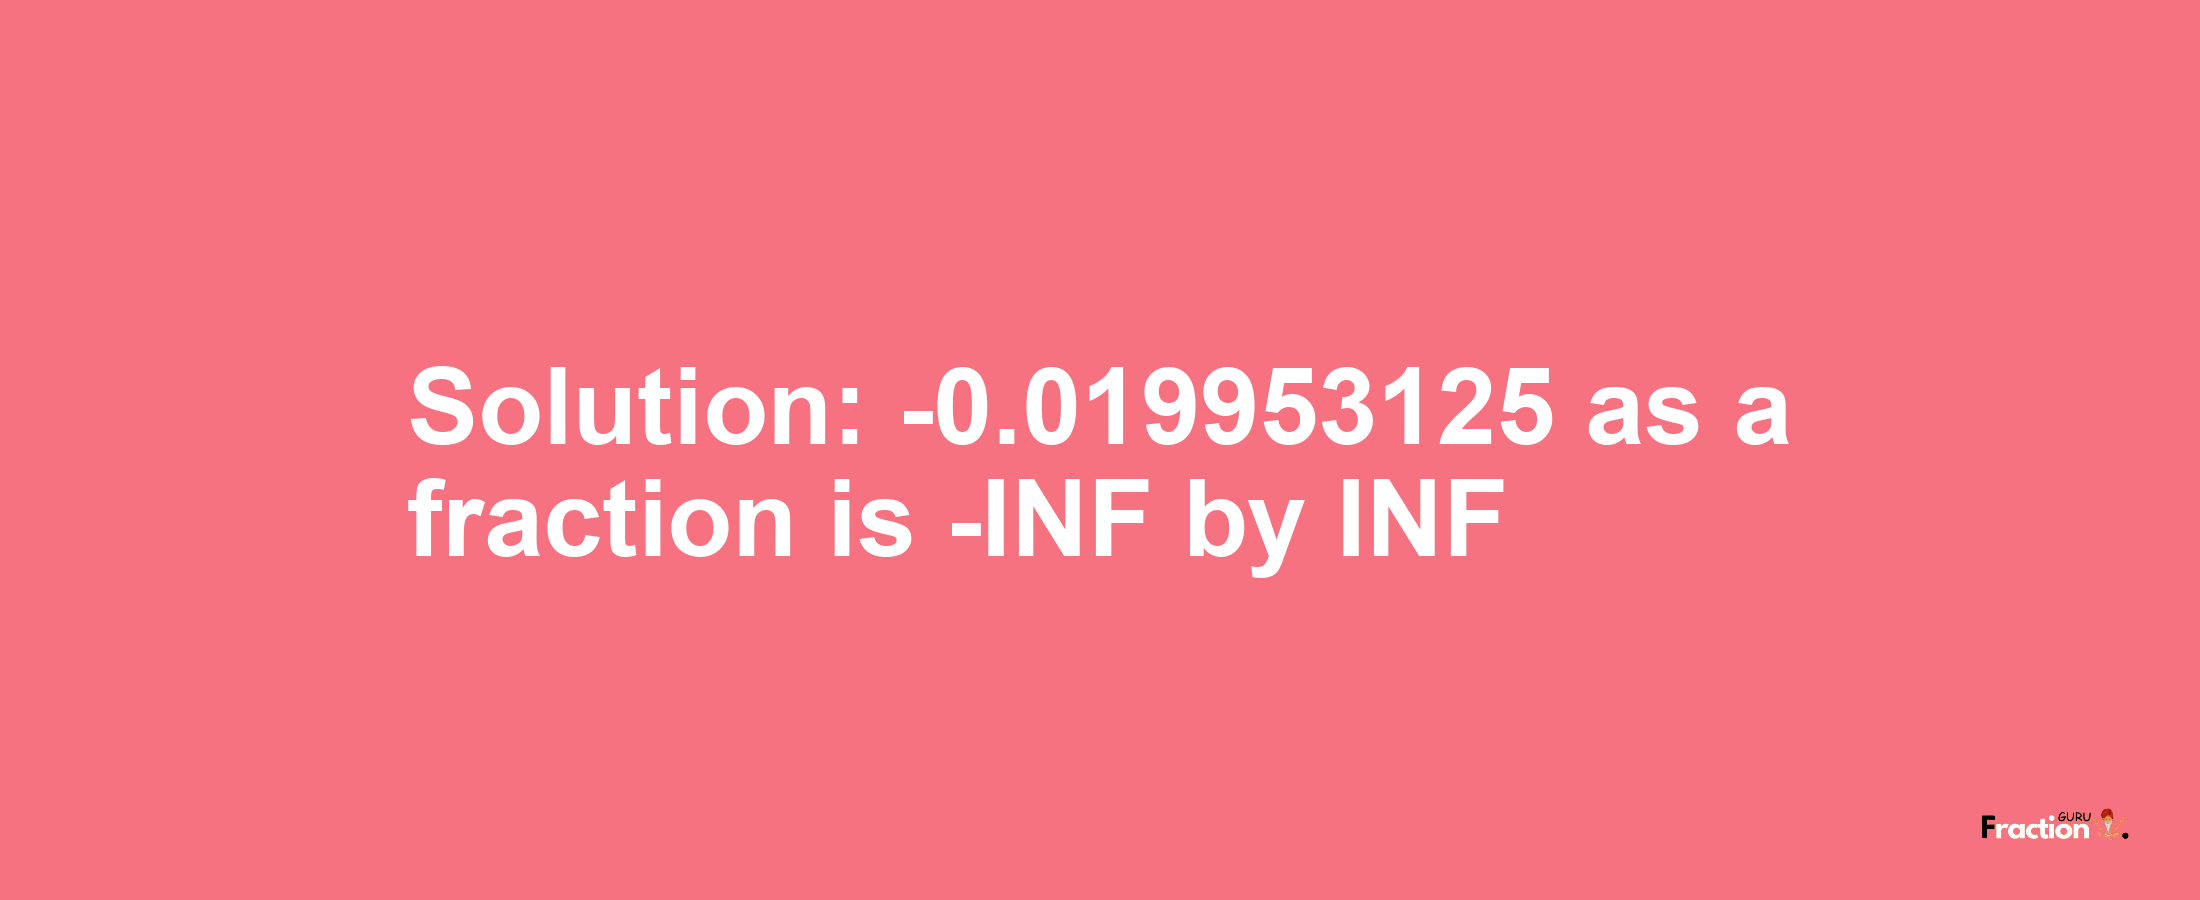 Solution:-0.019953125 as a fraction is -INF/INF